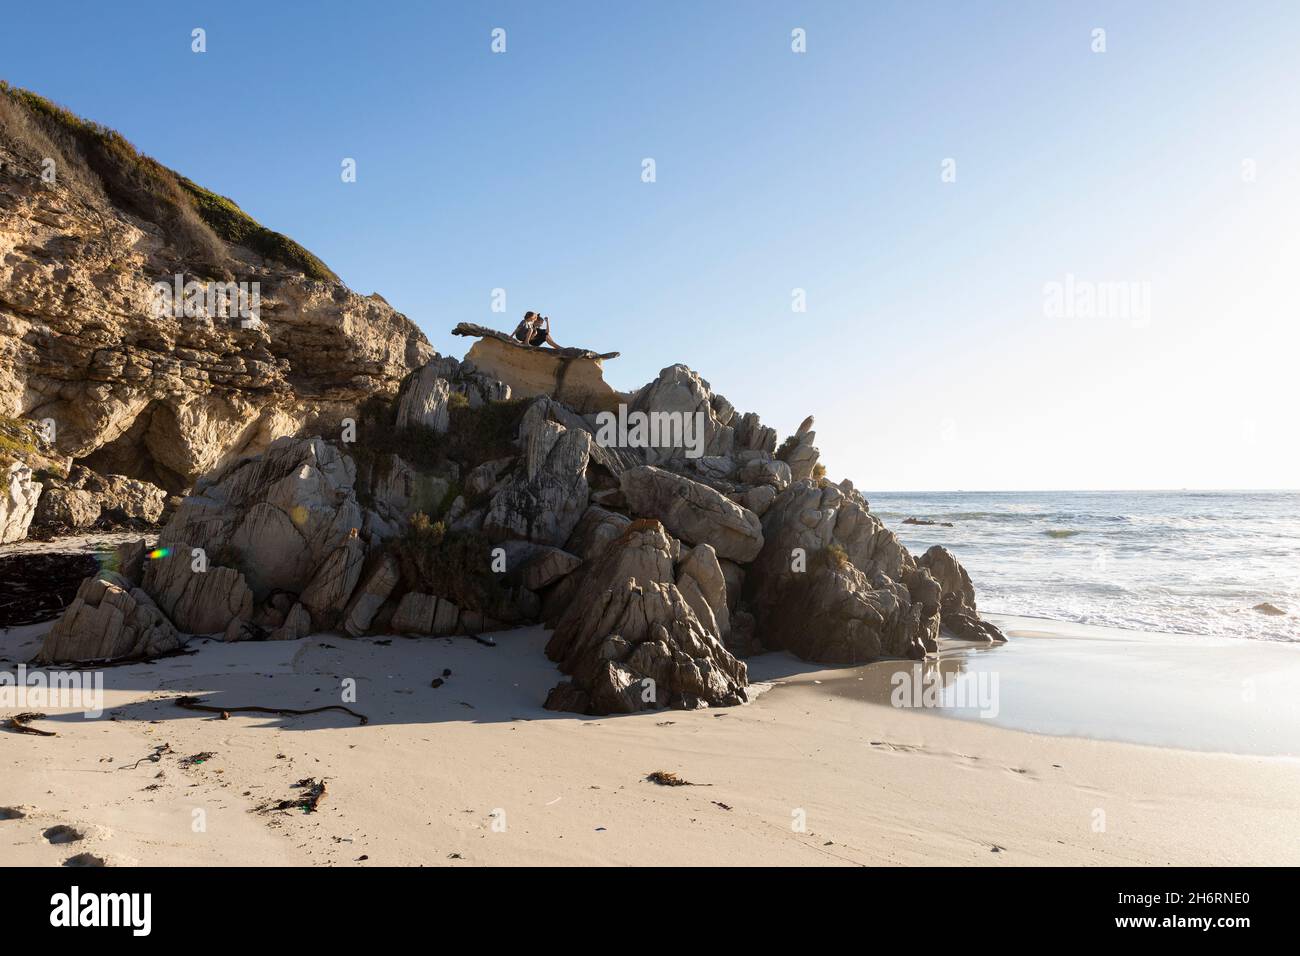 Two children perched on top of jagged rocks overlooking a sandy beach at low tide Stock Photo